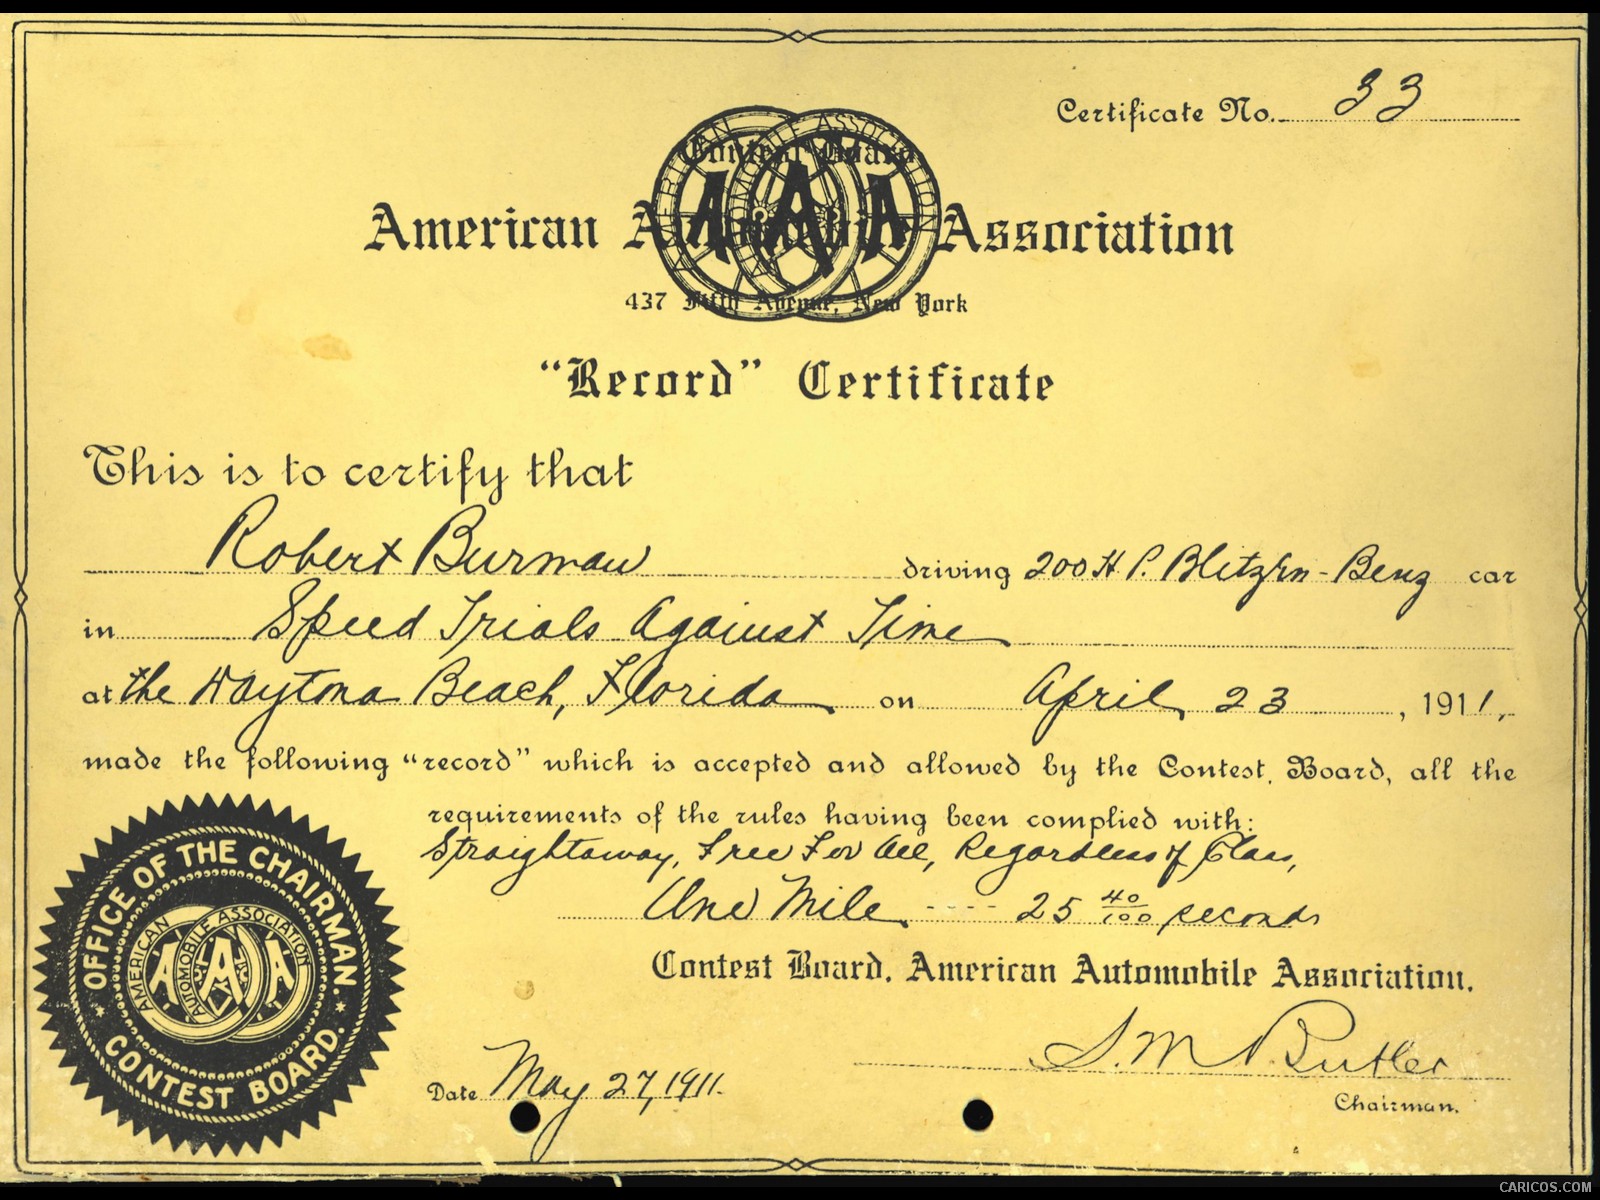 Blitzen-Benz 200-PS (1909) - Speed Record Certificate of the "American Automobile Association", #14 of 14